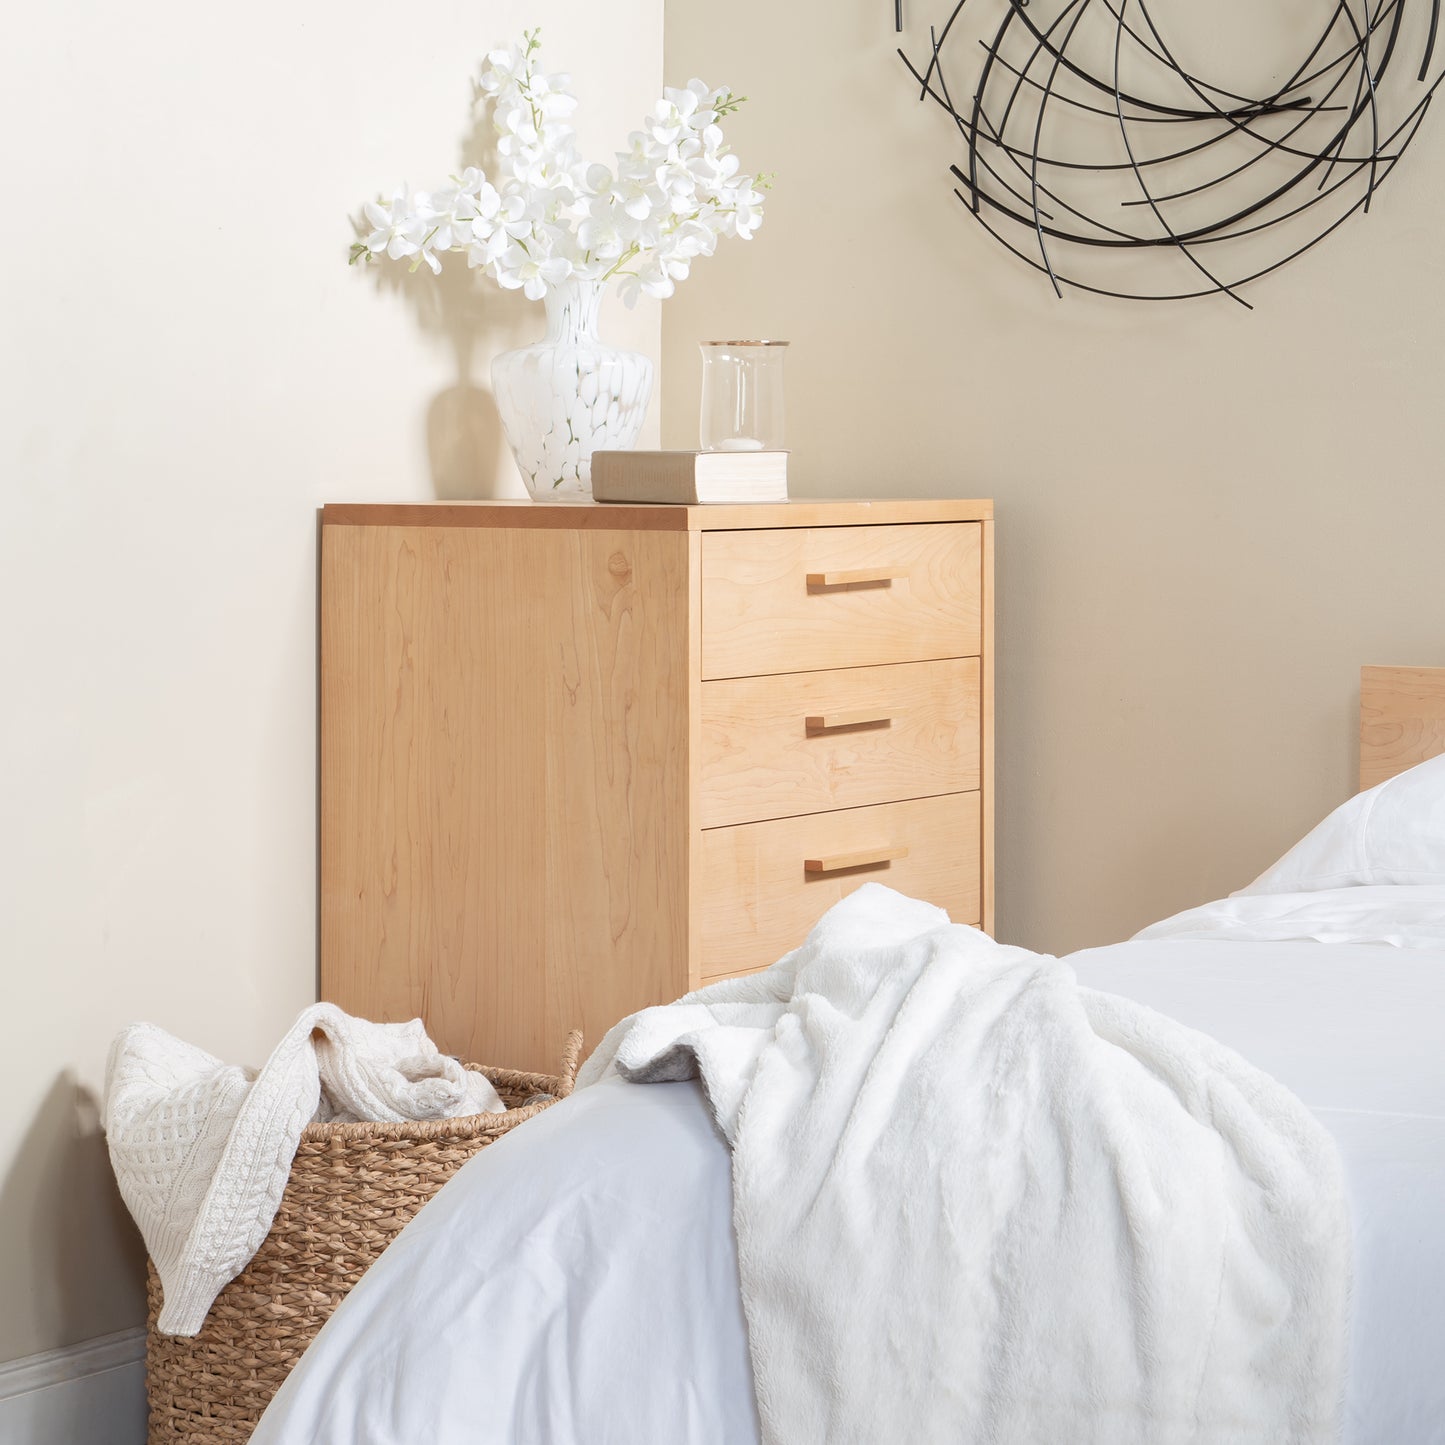 A modern bedroom corner featuring a Vermont Furniture Design Loft 5-Drawer Chest, exemplifying fine Vermont craftsmanship and made from solid hardwood, a white vase with white flowers on top, and an abstract black wall decor above.